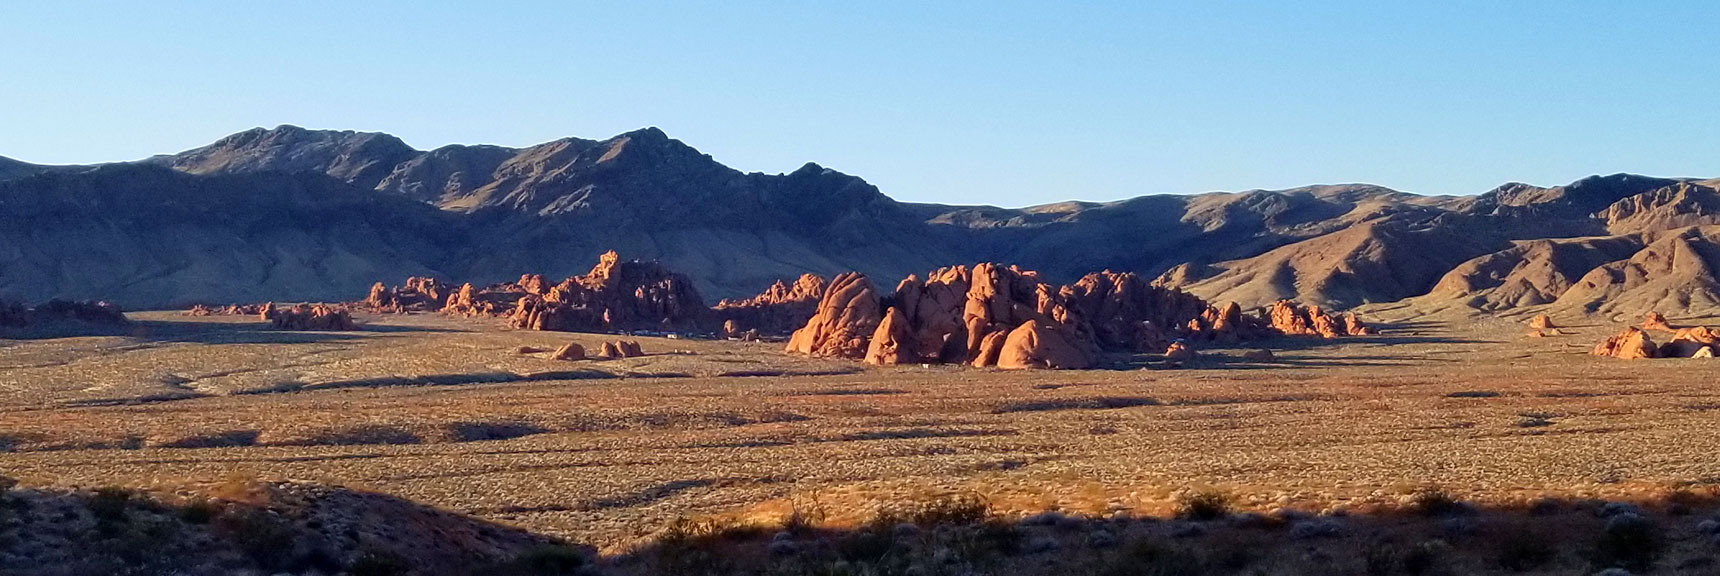 Looking Back Toward Atlatl Rock from the Pass on Prospect Trail in Valley of Fire State Park, Nevada